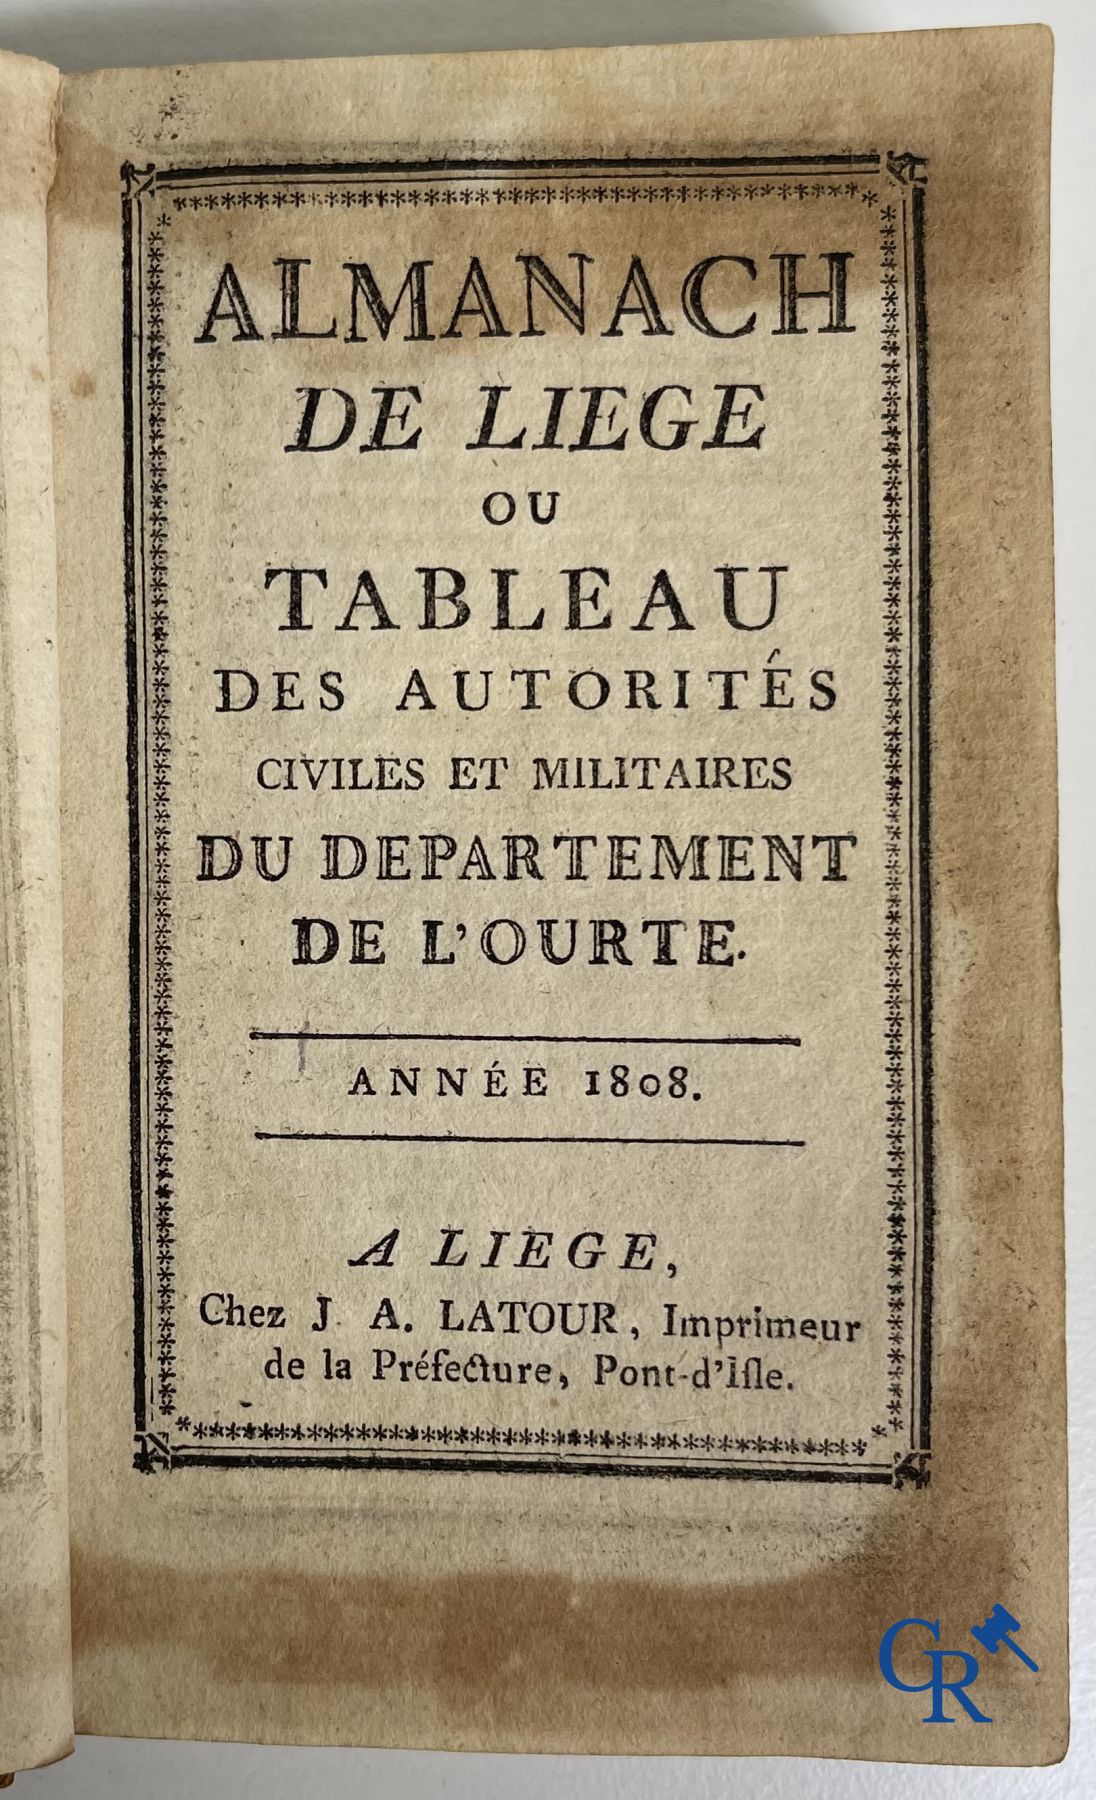 Early printed books: 5 interesting books with various themes. 17th-18th century. - Image 6 of 11